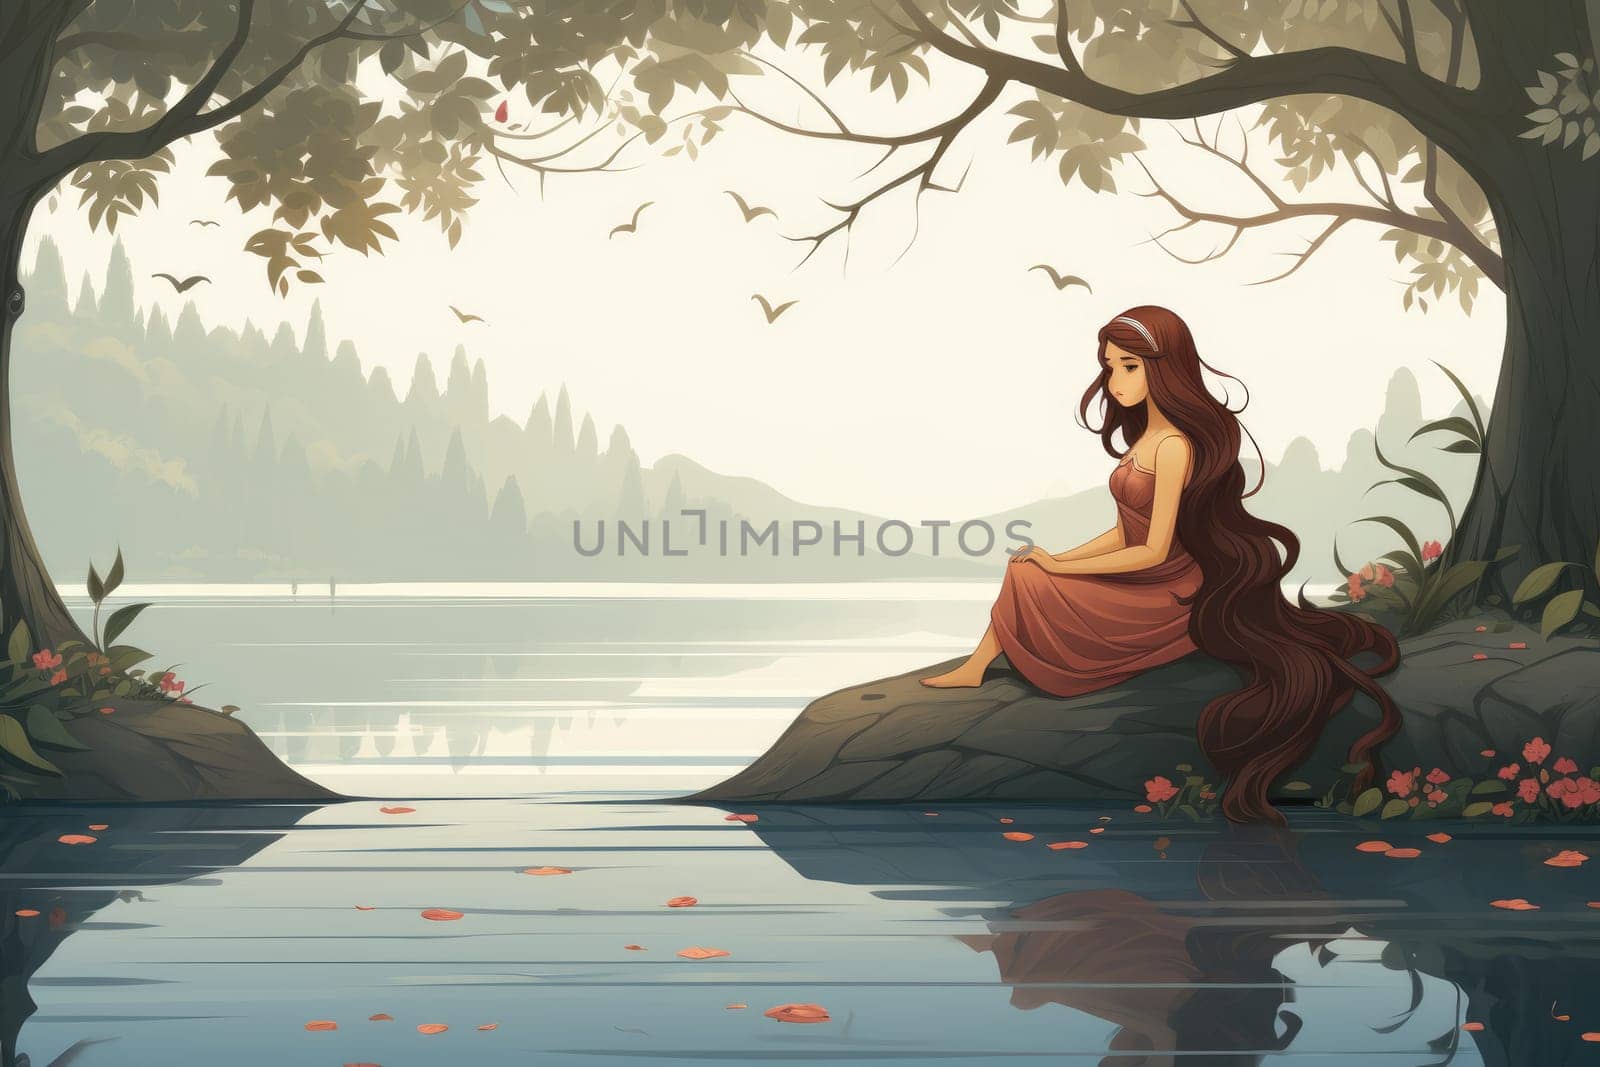 By the river, surrounded by greenery and flowers, a girl with beautiful long hair sits on a rock.